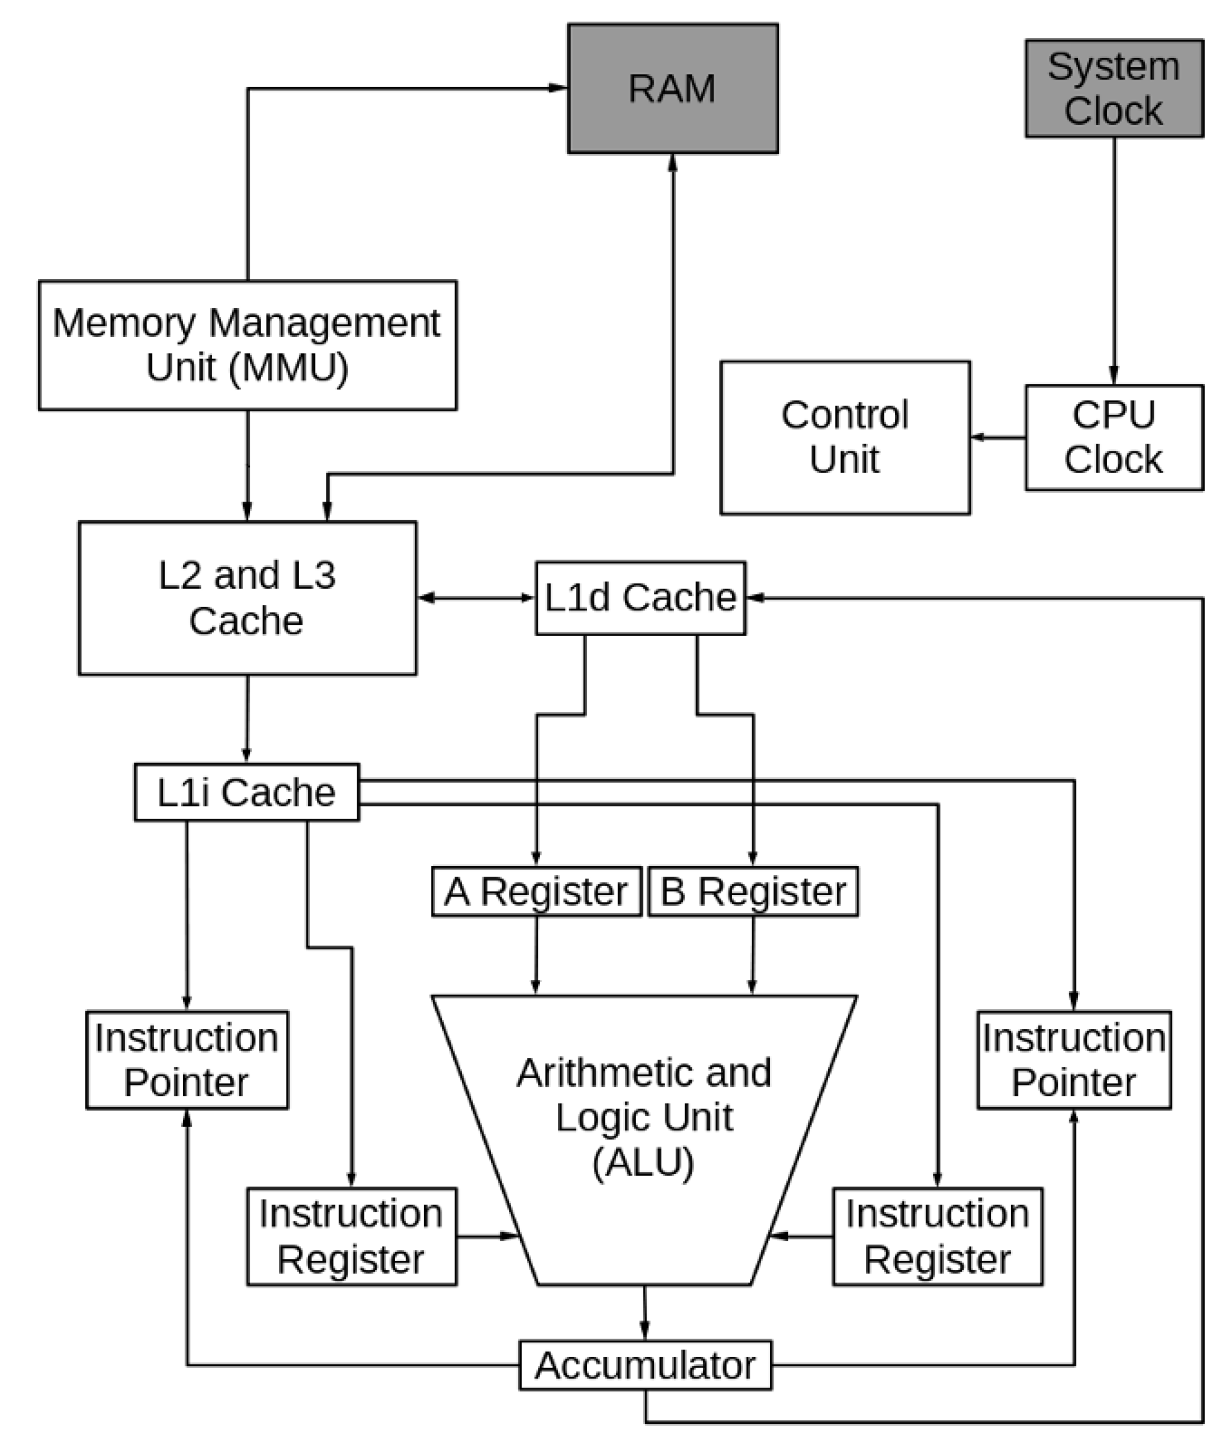 The central processing unit (CPU): Its components and